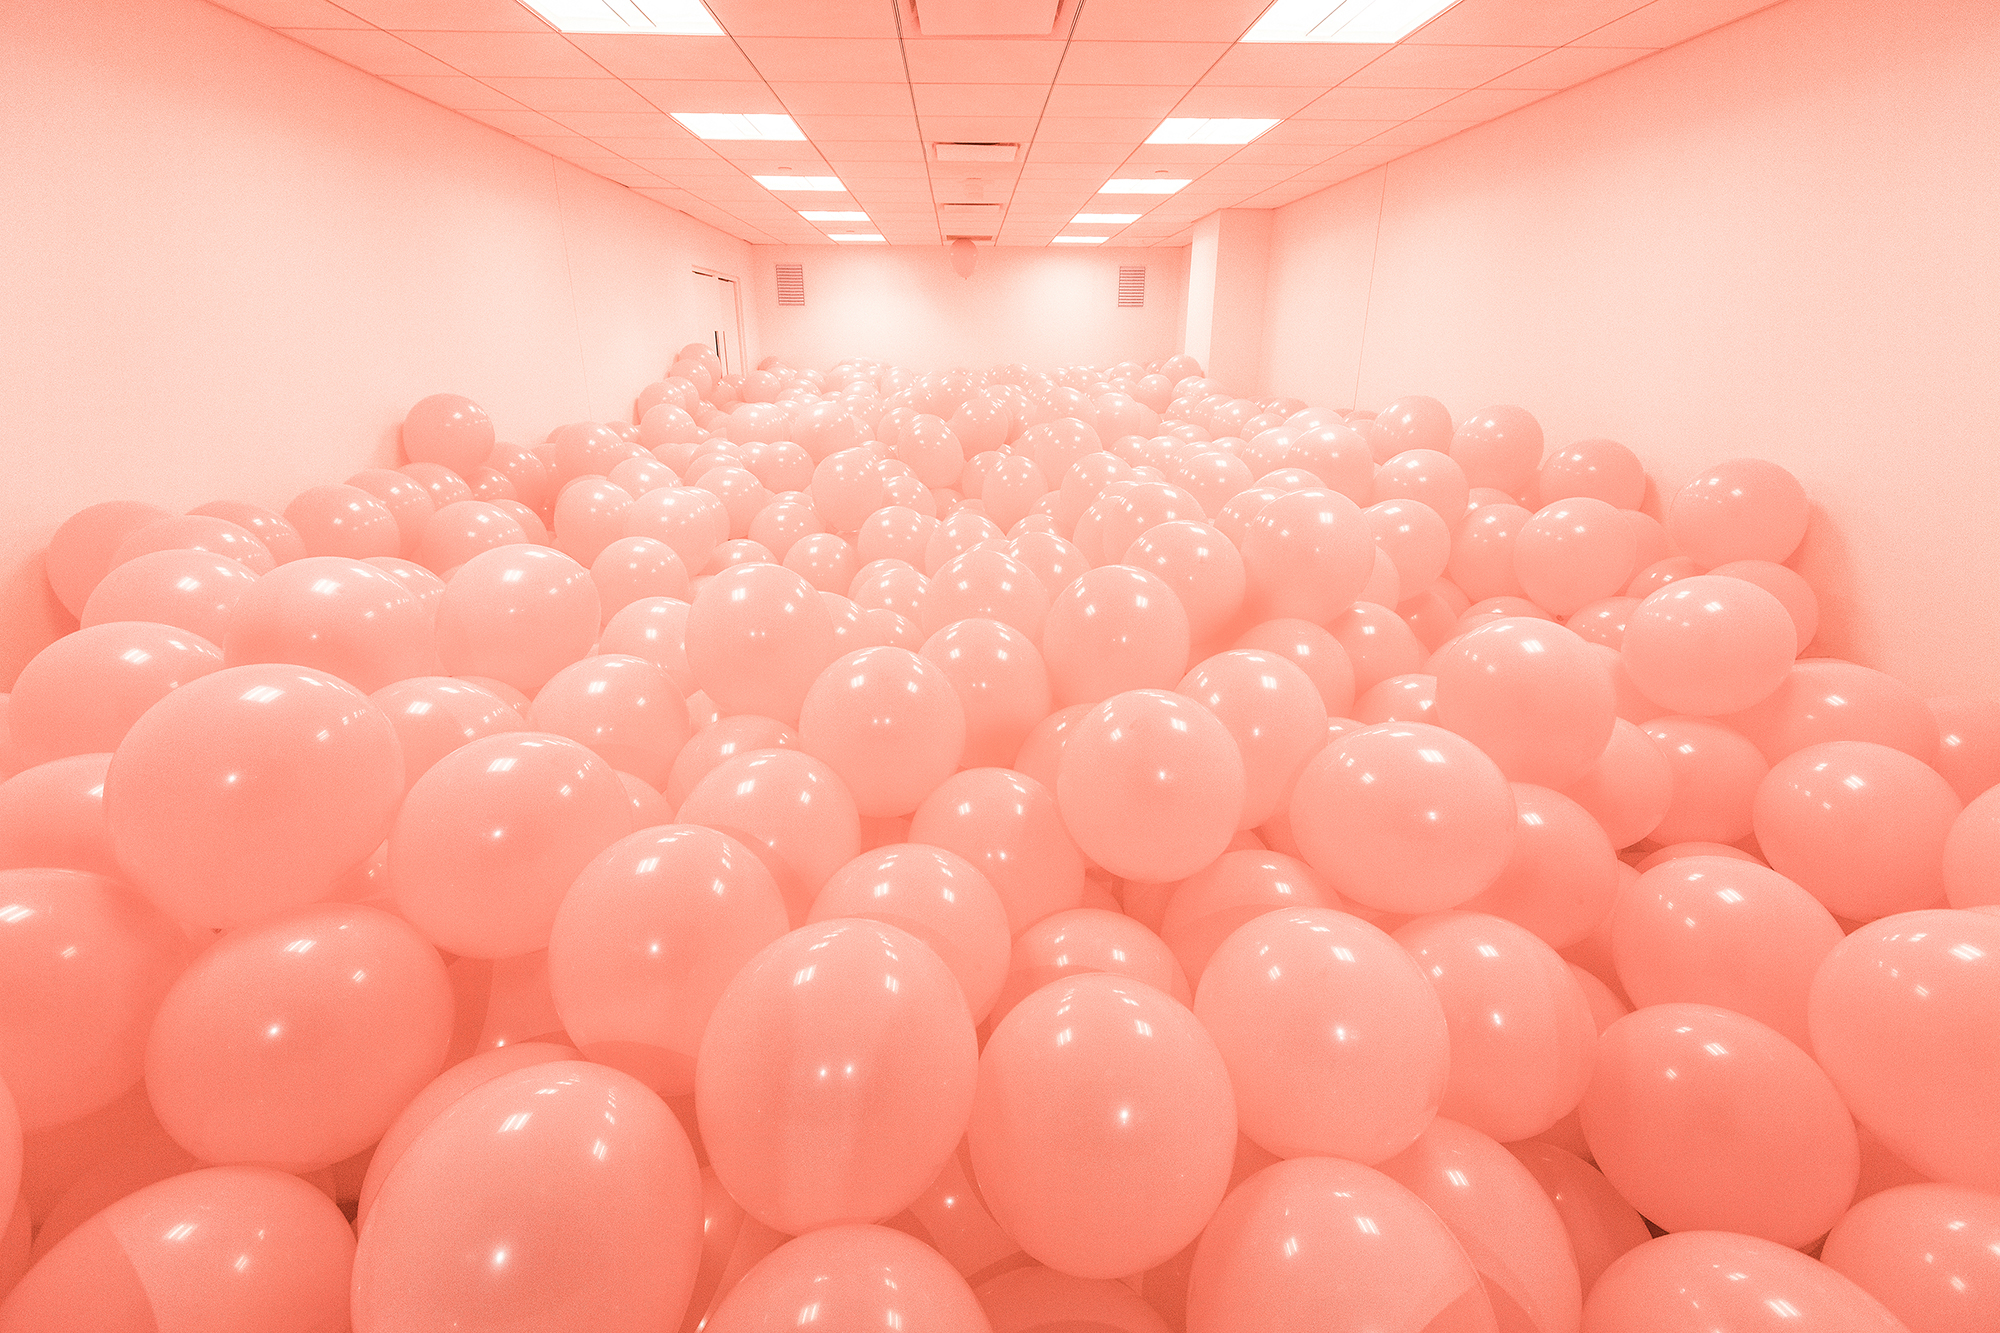 Martin Creed 'Work No. 329' in PlayTime at the Peabody Essex Museum